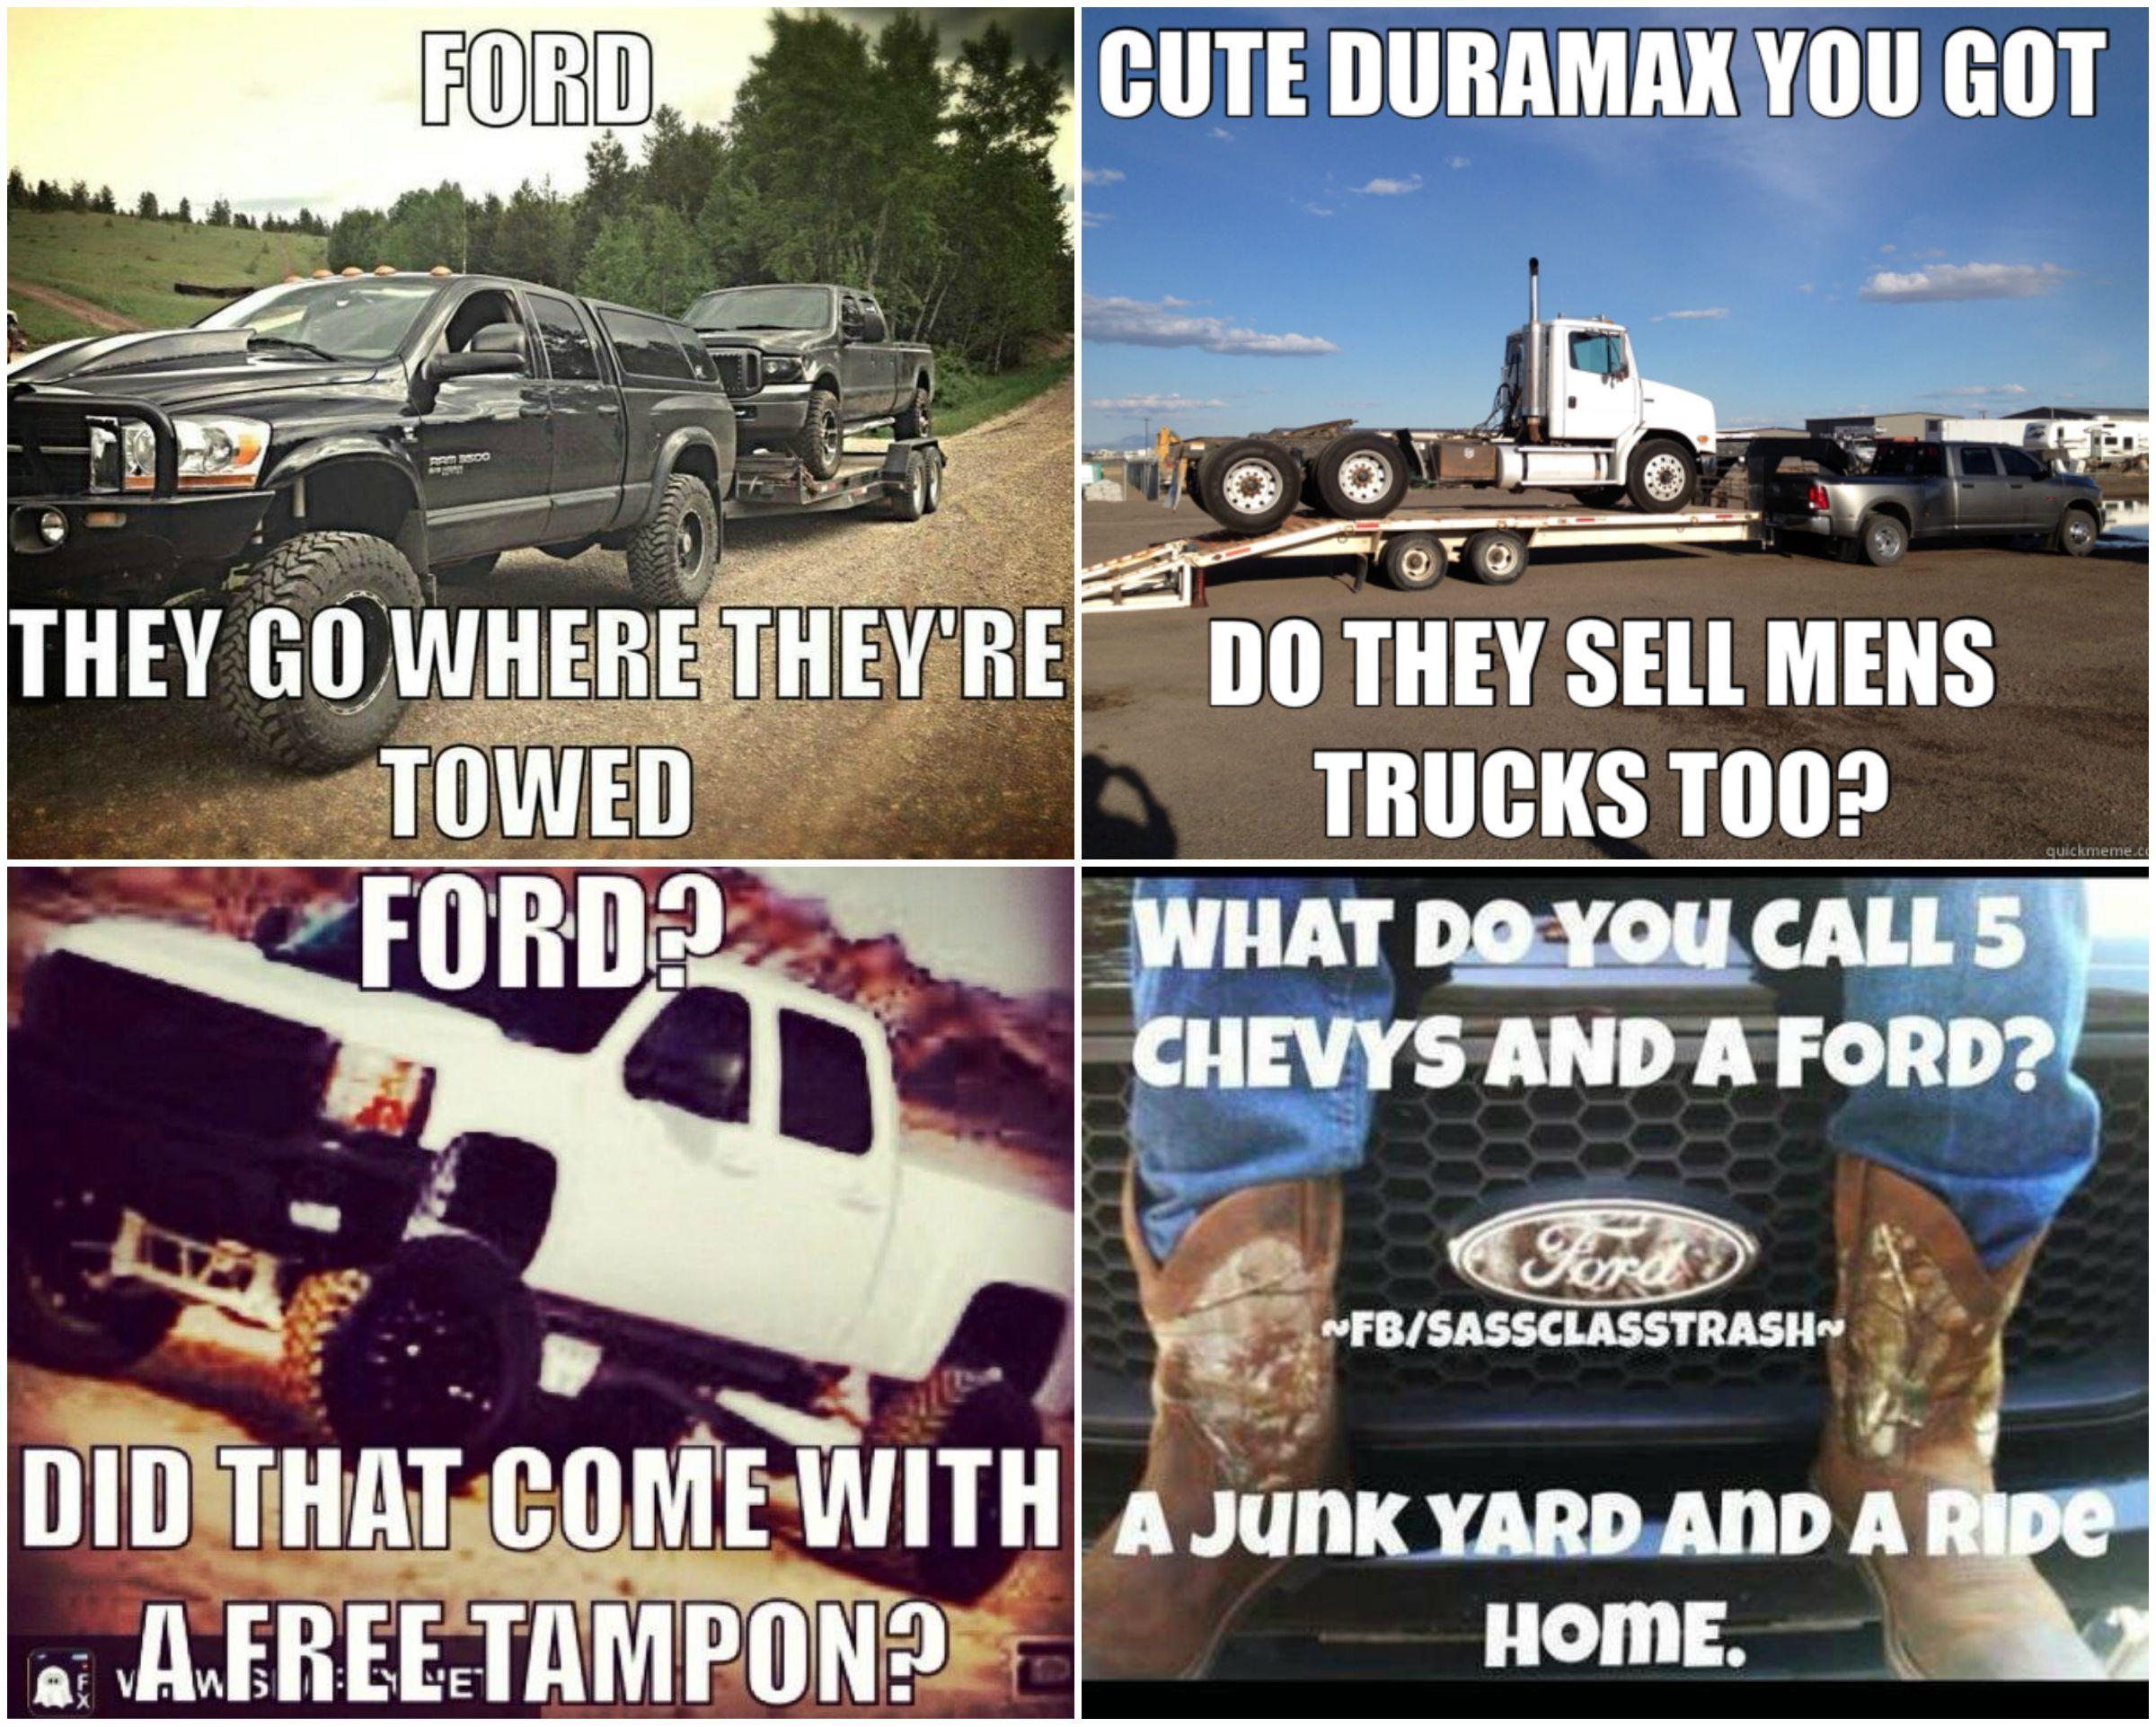 Funny Cummins Logo - 20 Reasons Why Diesel Trucks Are the Worst | Eventing Nation - Three ...